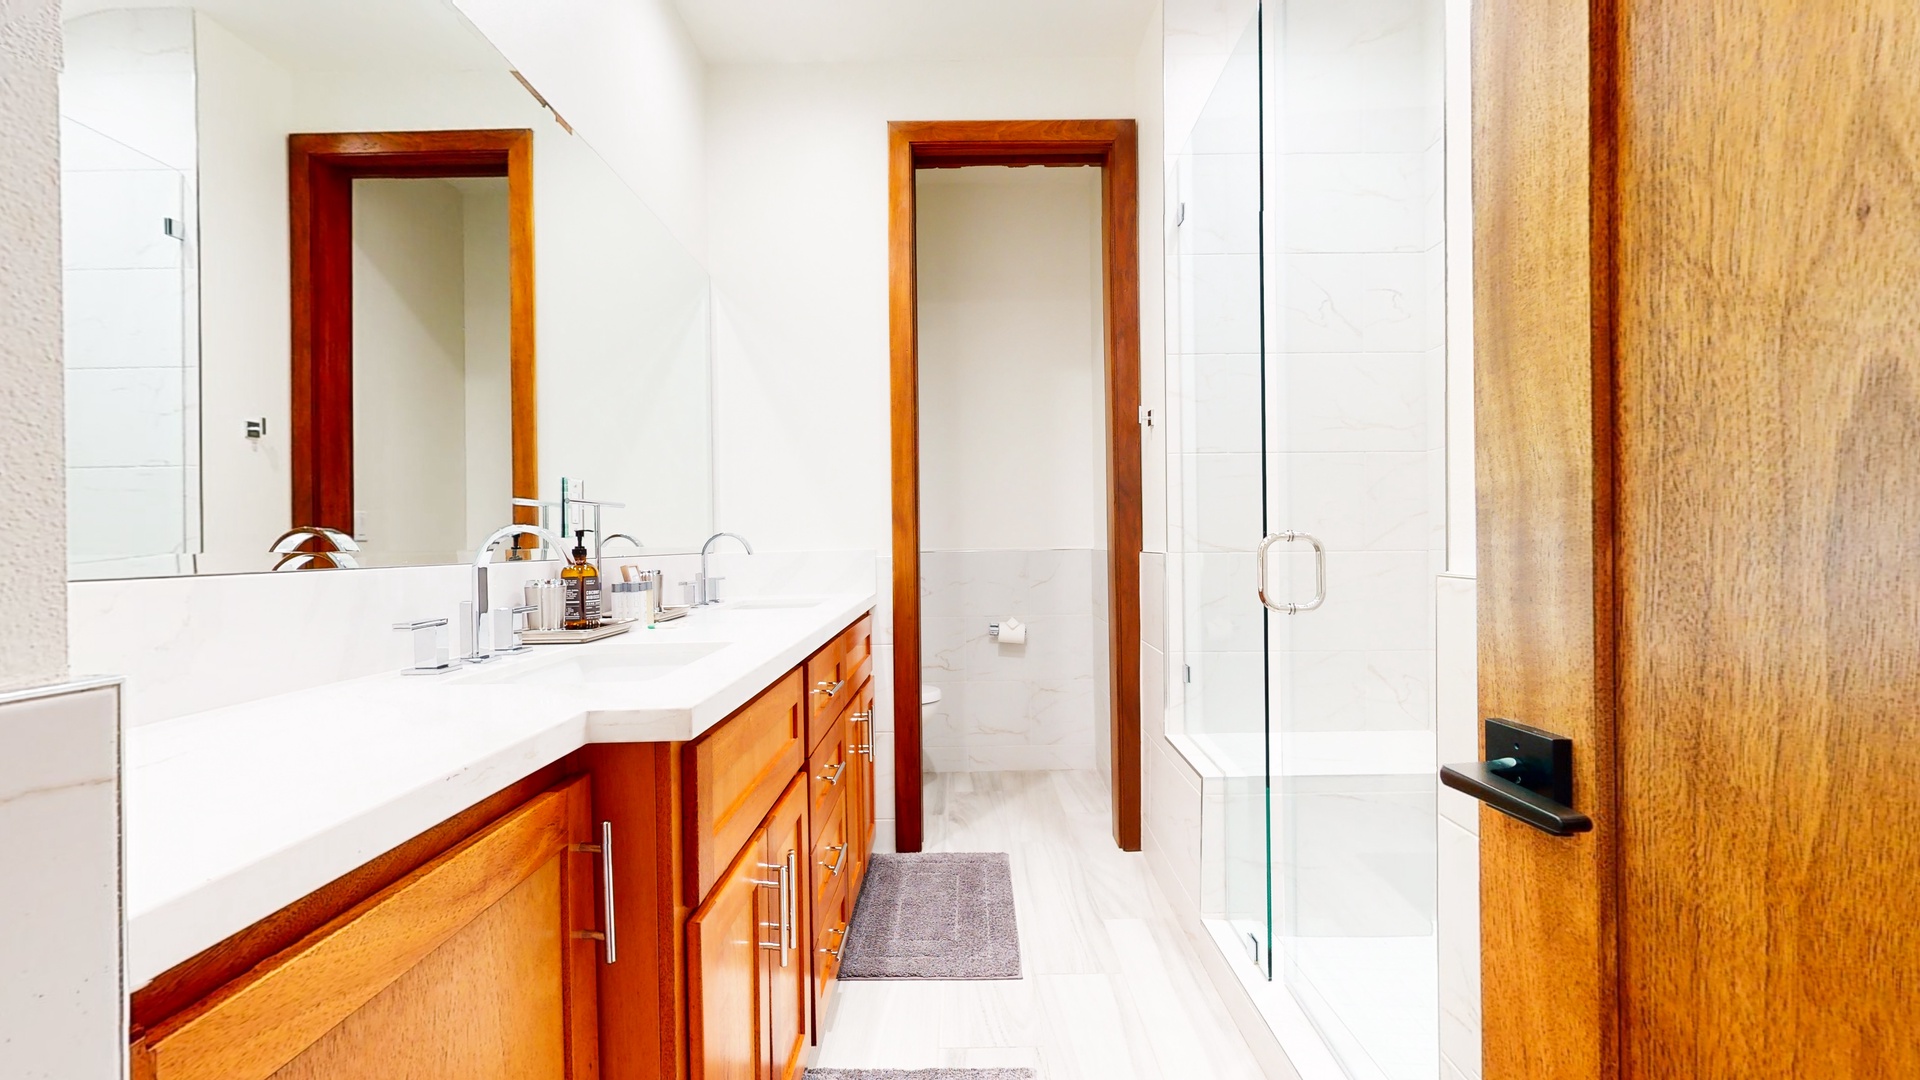 The 3rd floor hall bath offers a sprawling double vanity and gorgeous glass shower